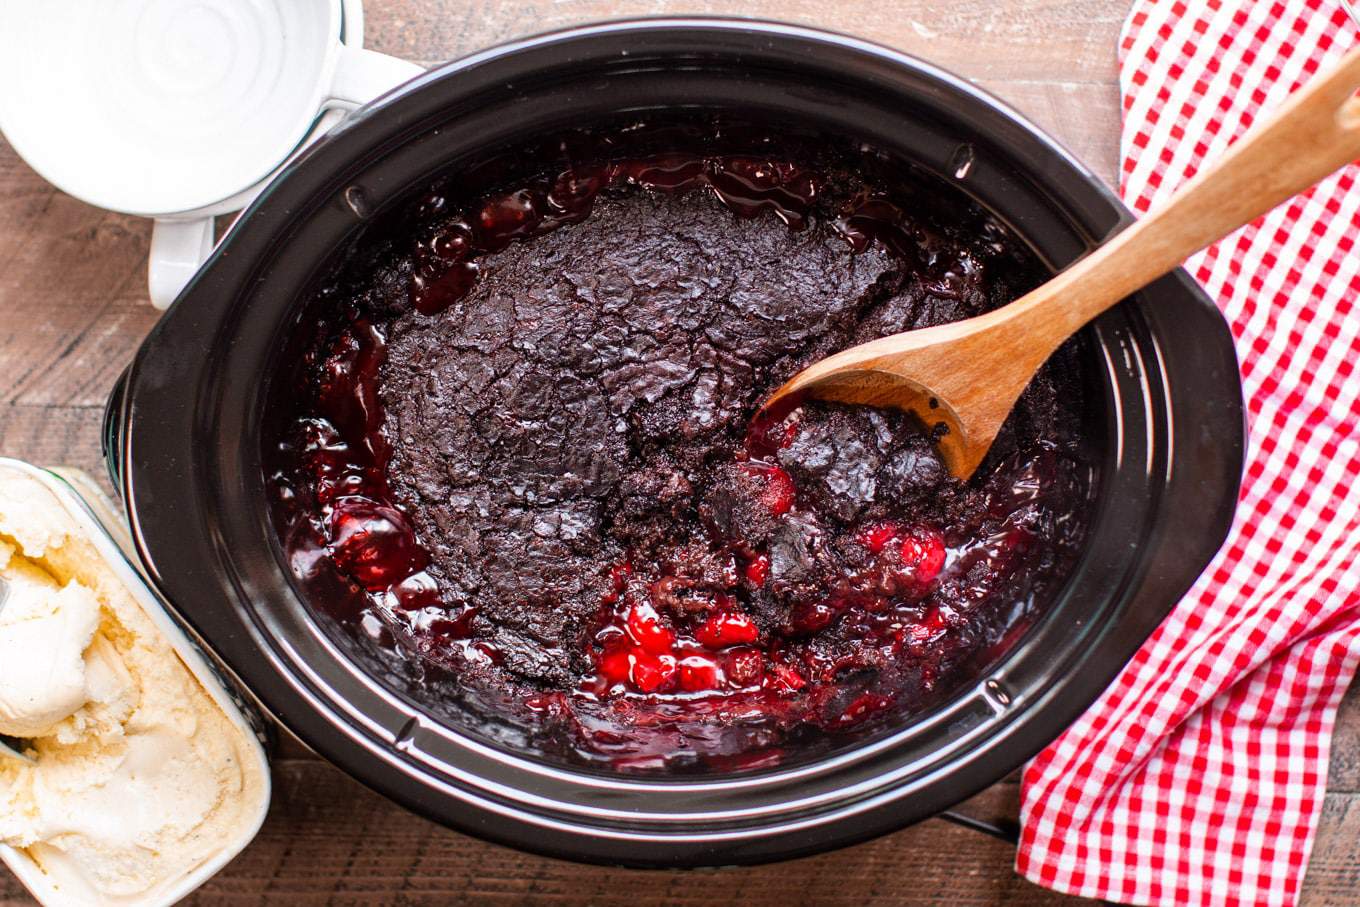 Crockpot chocolate cherry cake with a wooden spoon next to a red checkered table napkin.